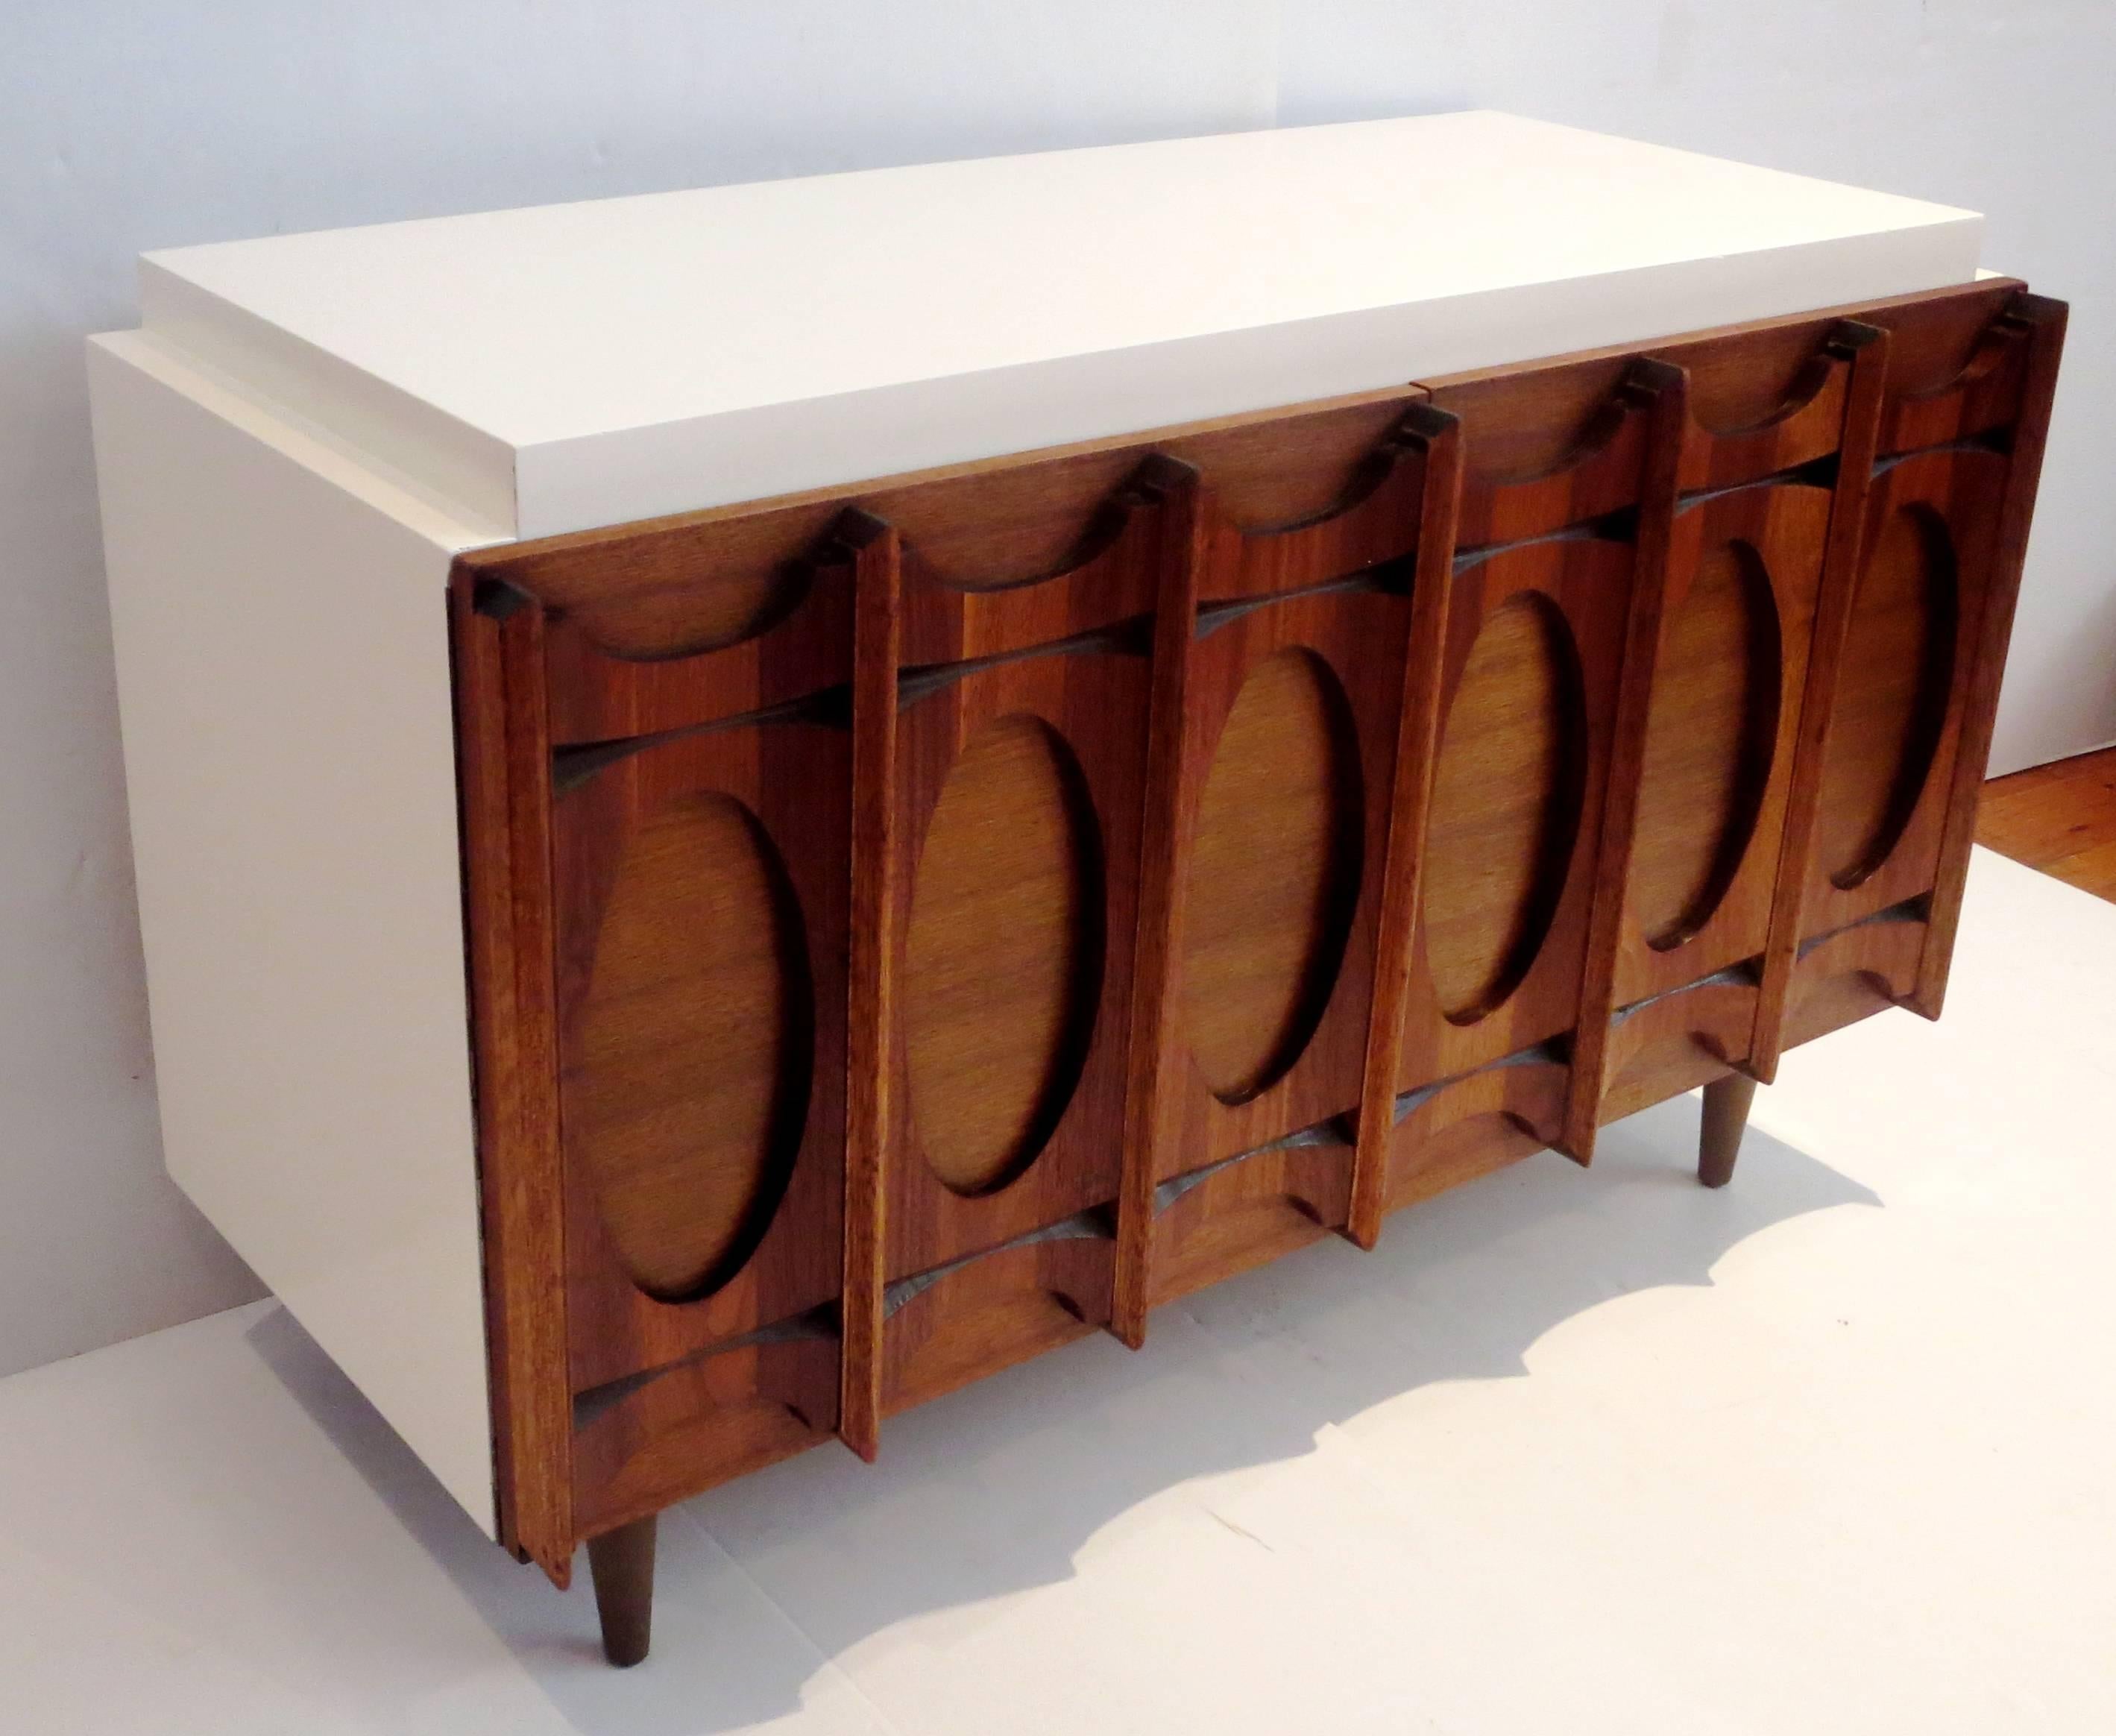 One-of-a-kind small, low cabinet circa 1950s. Beautiful sculpted walnut front doors and a white lacquer body sitting on tapered legs. Great as a mini bar, record cabinet or entertainment console. Item has been completely restored and is in great